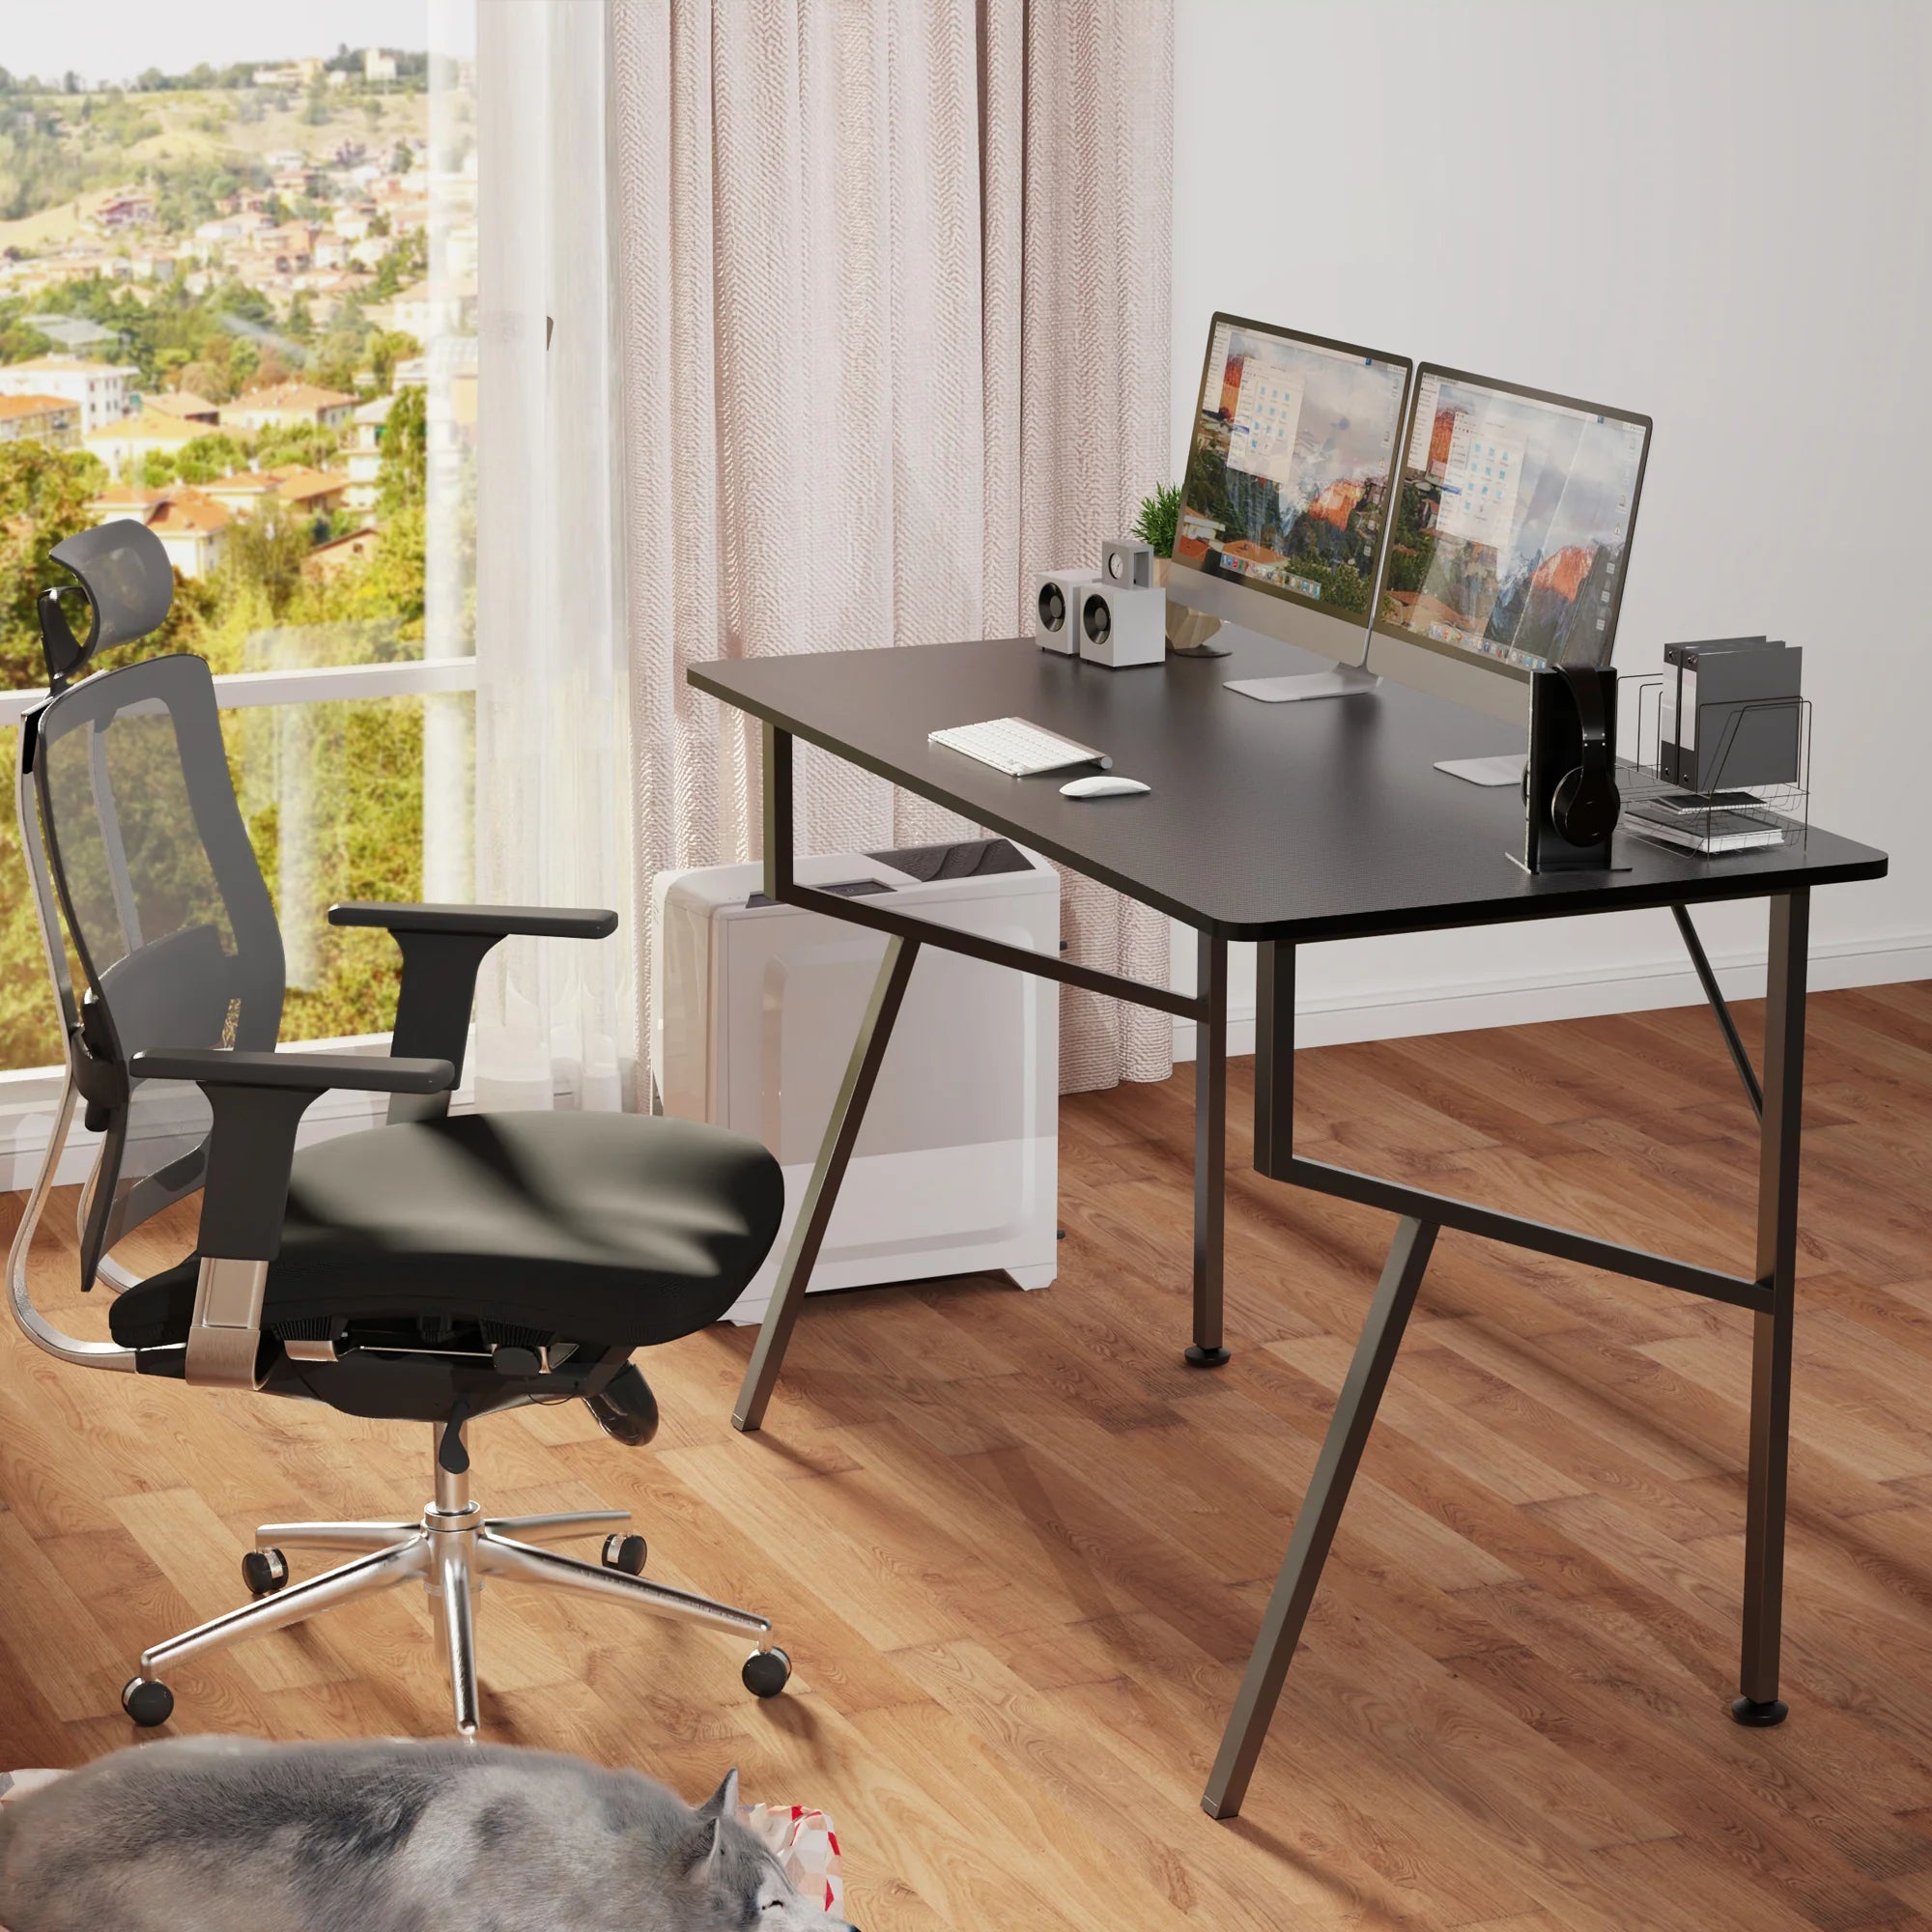 Gaming Desk - Order Gaming Table Online at Best Price in India